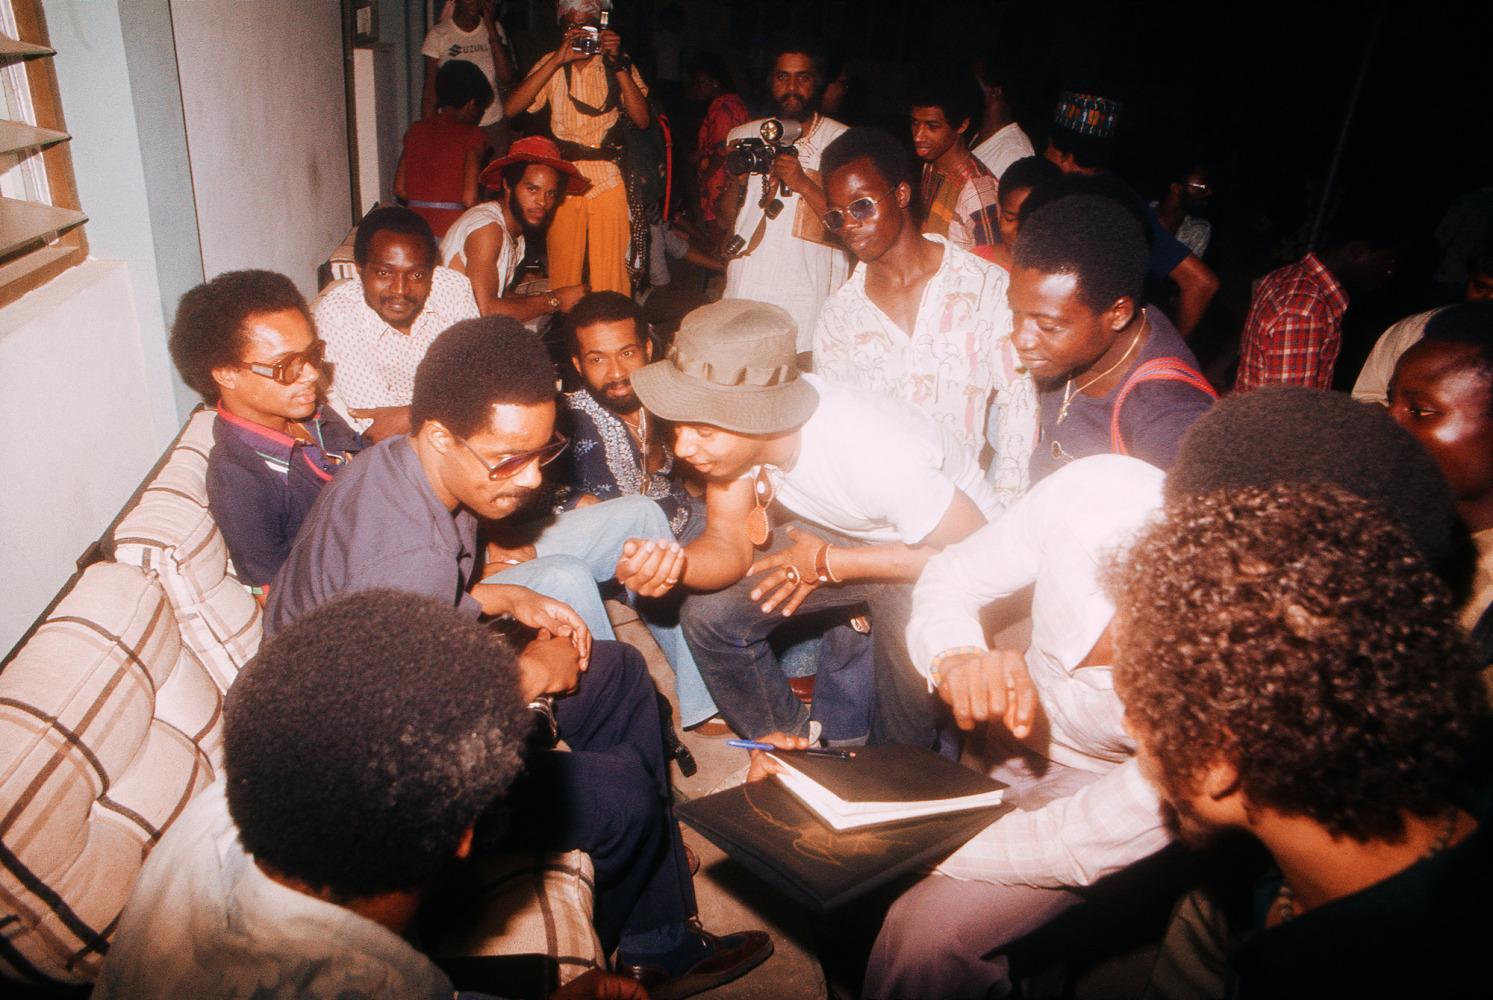 Roy Lewis (b. 1937)
Stevie Wonder Visiting FESTAC Village, 1977
Archival inkjet print on Simply Elegant Gold Fibre paper
Image: 13 3/4 x 20 inches (34.9 x 50.8 cm)
Sheet: 17 x 22 inches (43.2 x 55.9 cm) Framed: 18 5/8 &amp;times; 25 3/8 &amp;times; 1 1/2 inches (47.3 &amp;times; 64.5 &amp;times; 3.8 cm)
Edition of 5, printed 2023